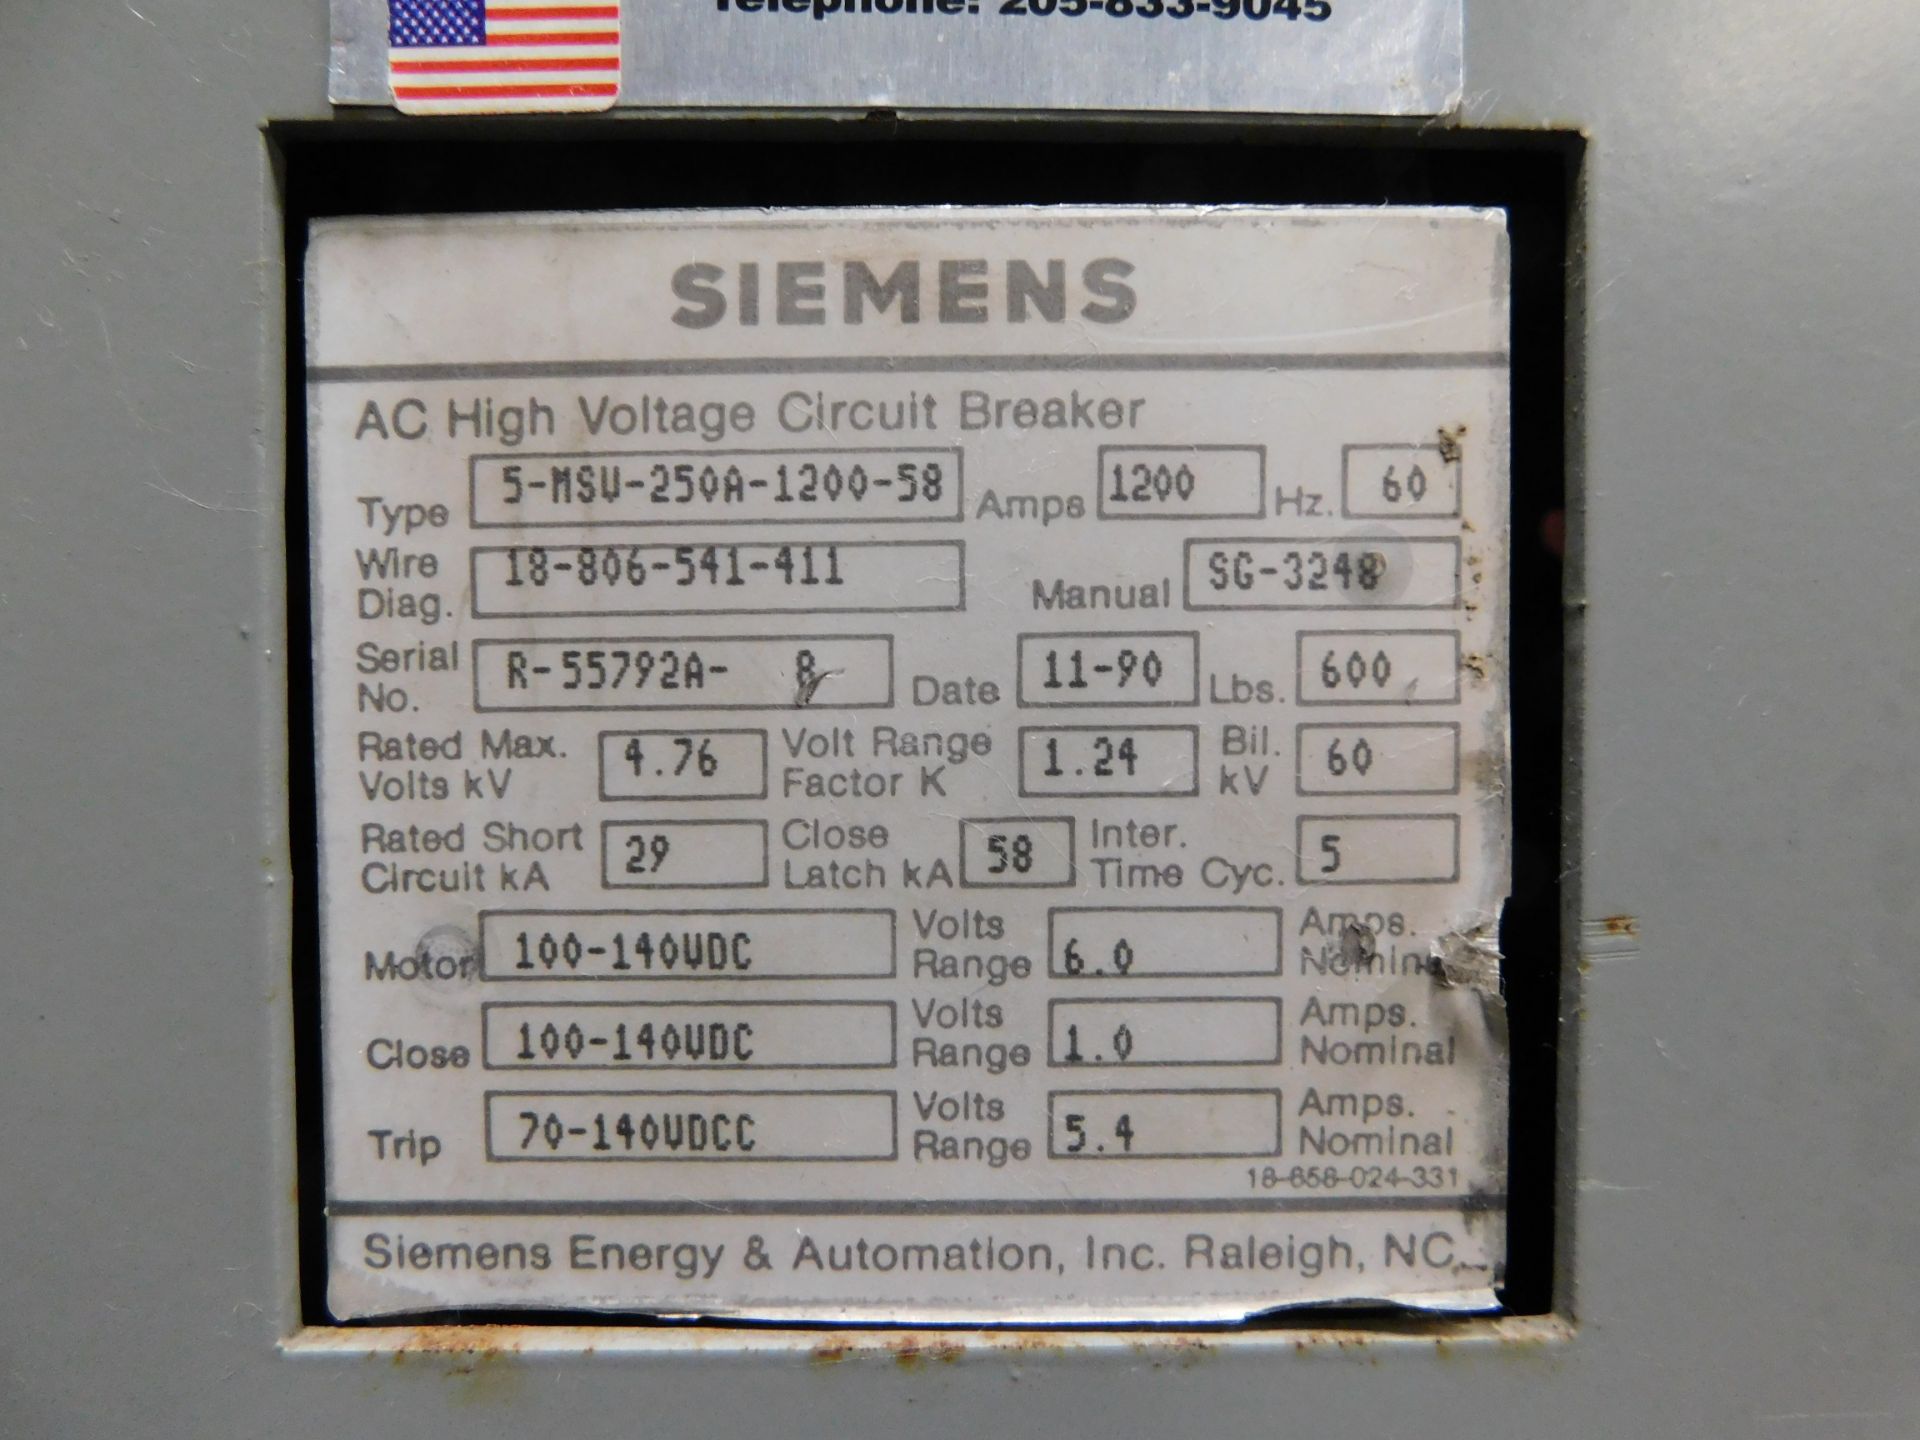 Siemens 5-MSV-250A-1200-58 1200 Amp AC High Voltage Circuit Breaker - Image 2 of 12